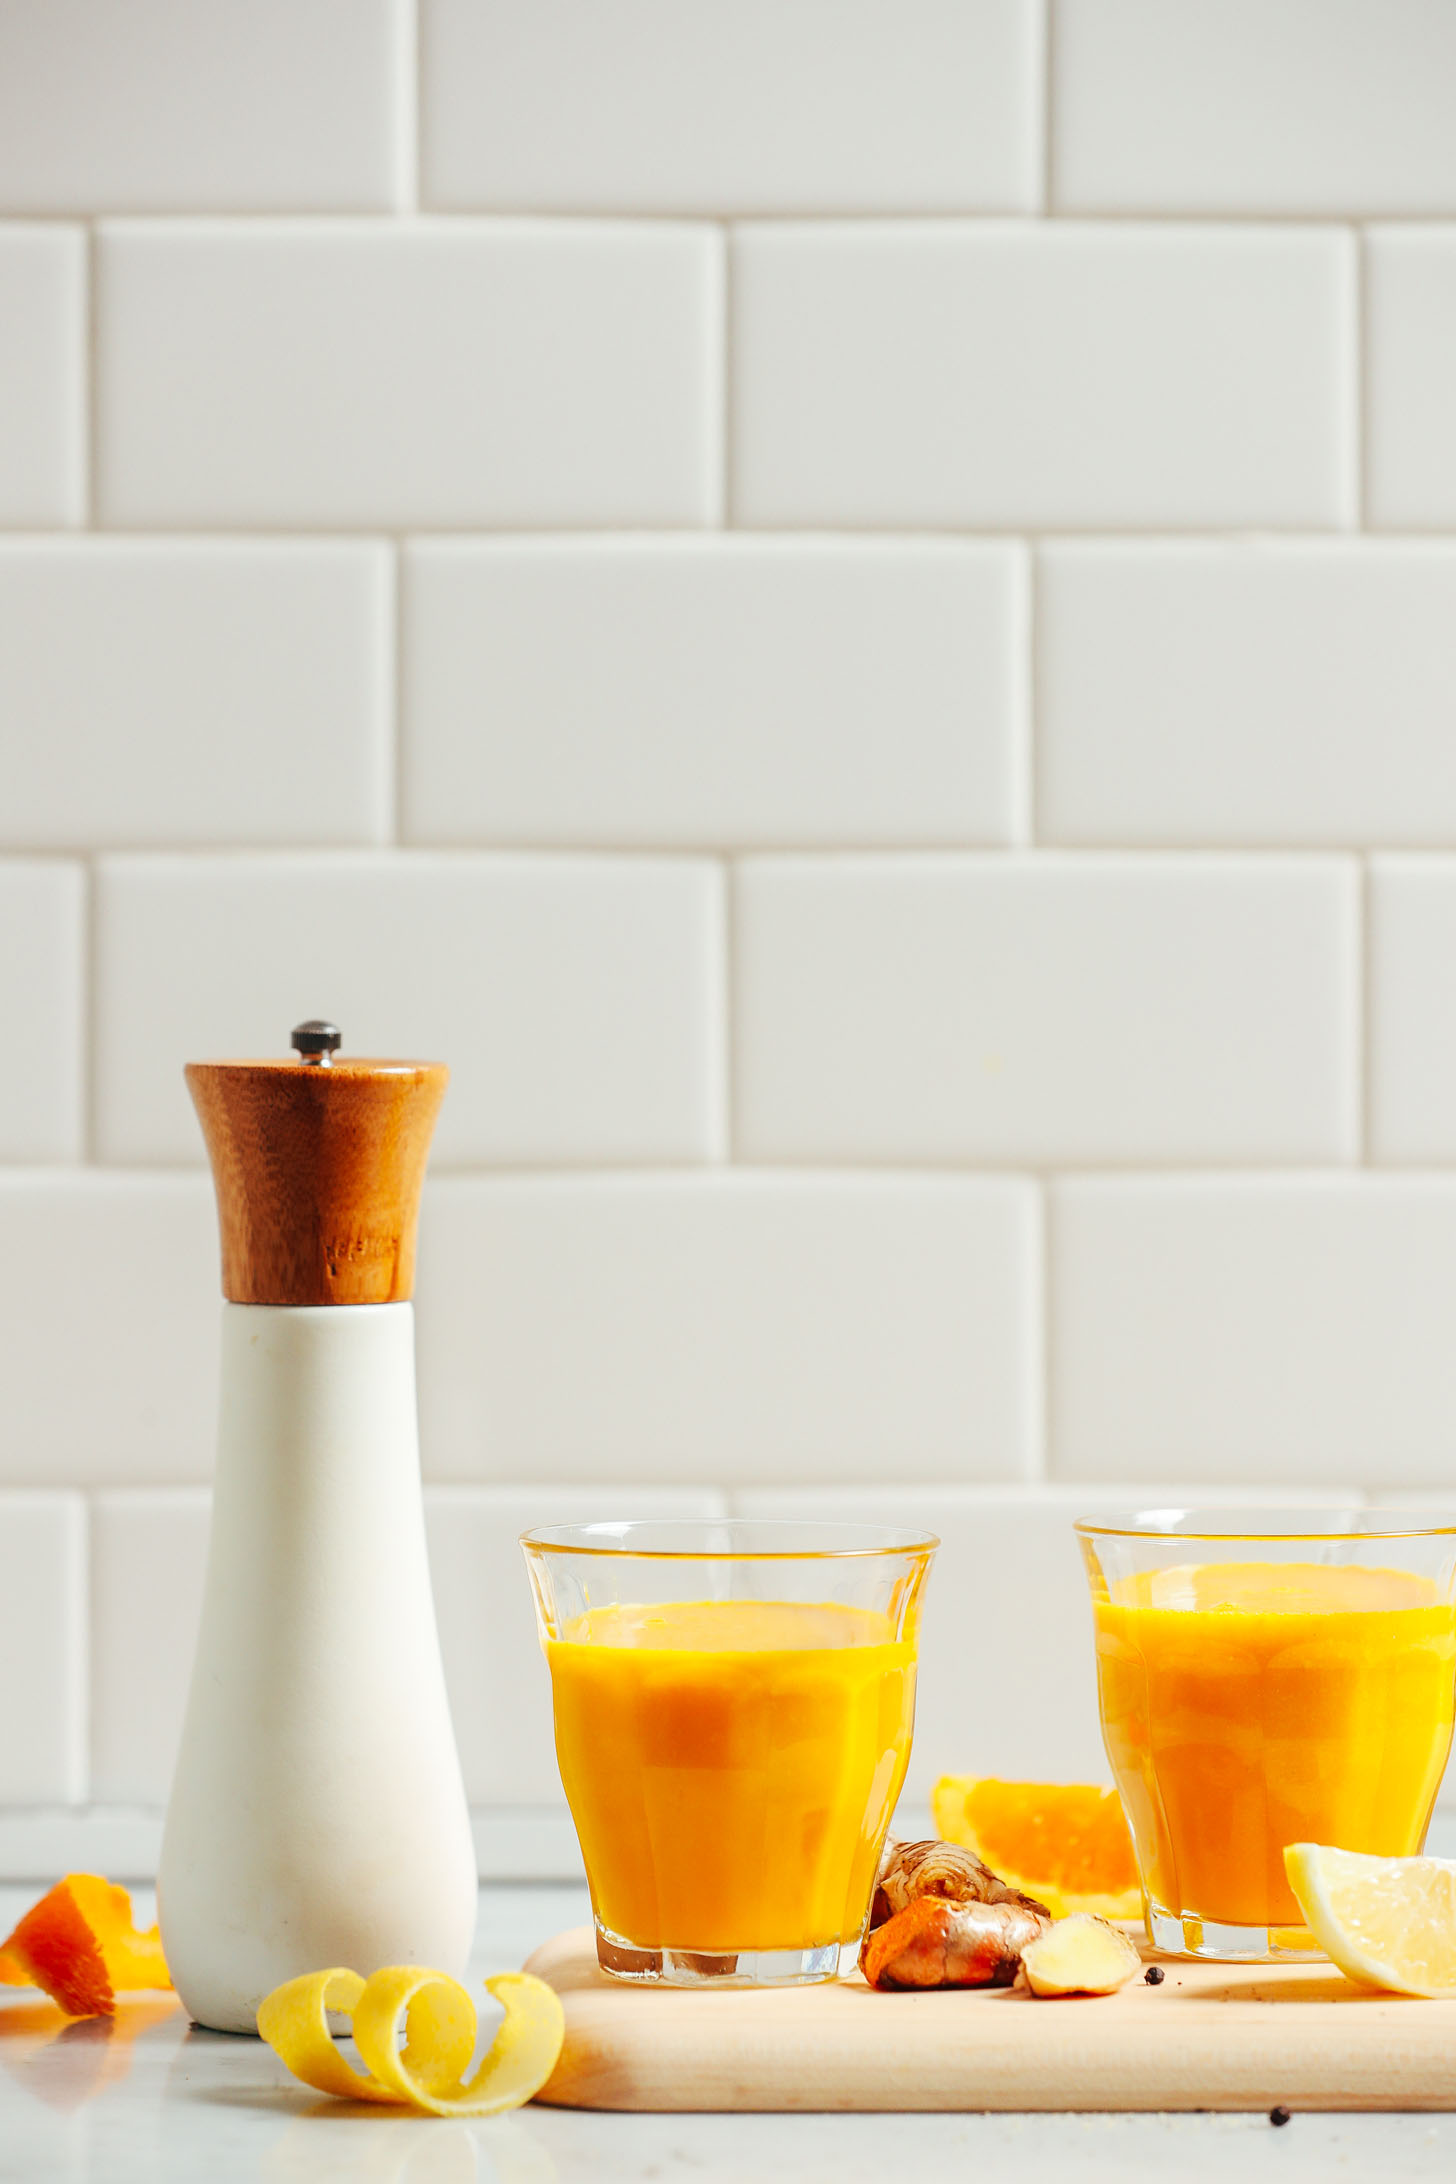 Glasses of our 5-Ingredient Turmeric Wellness Shots recipe surrounded by ingredients used to make them